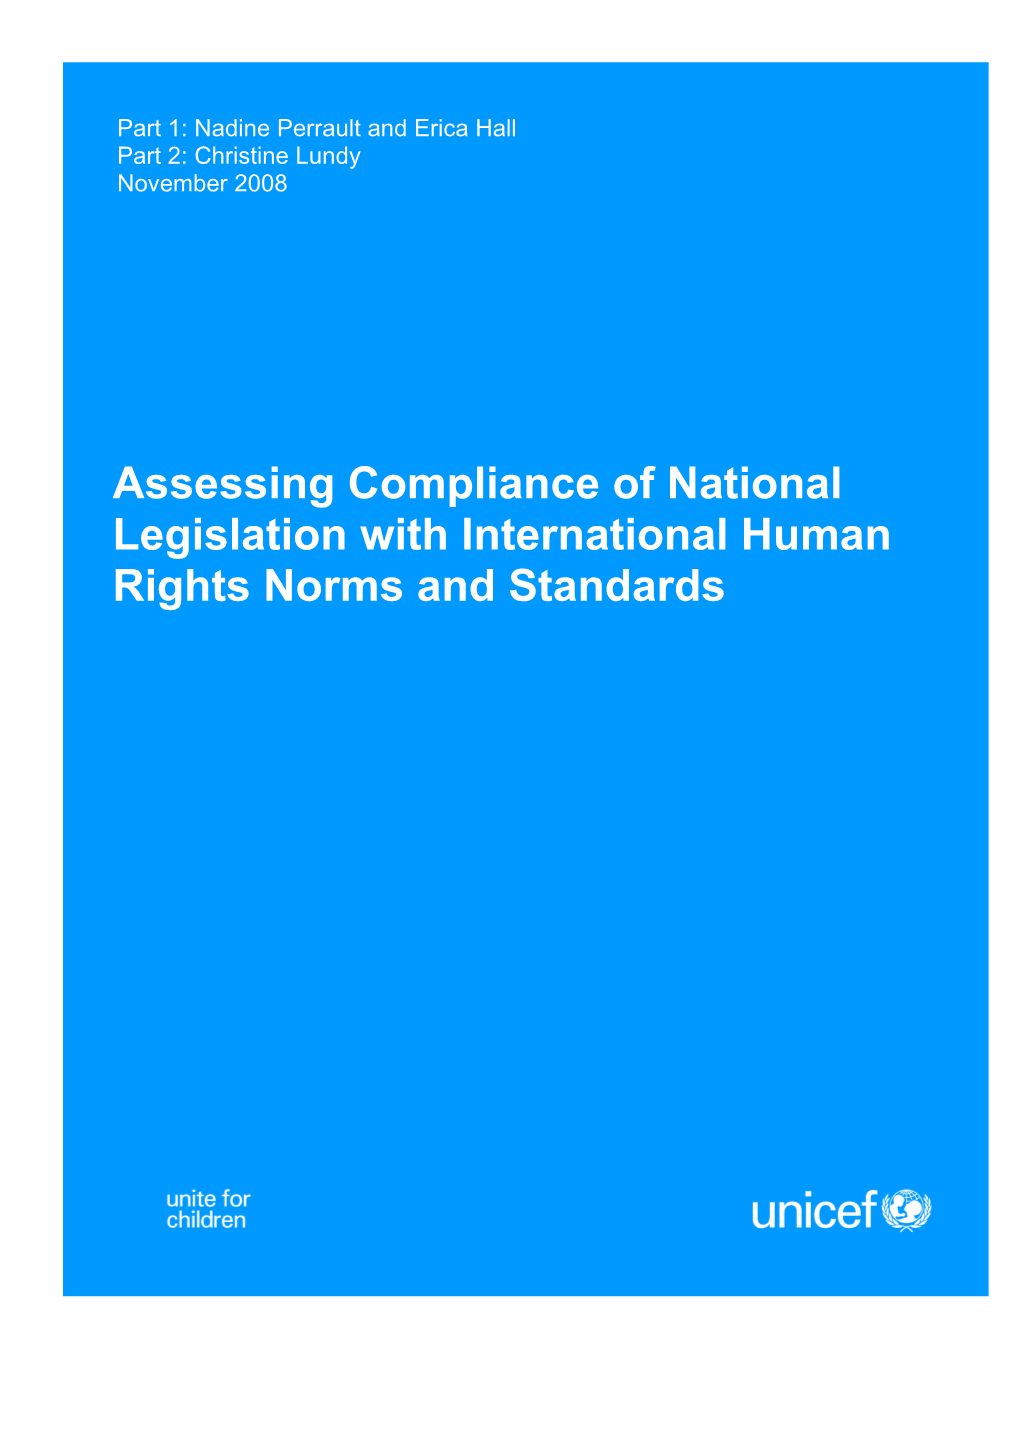 Assessing Compliance of National Legislation with International Human Rights Norms And